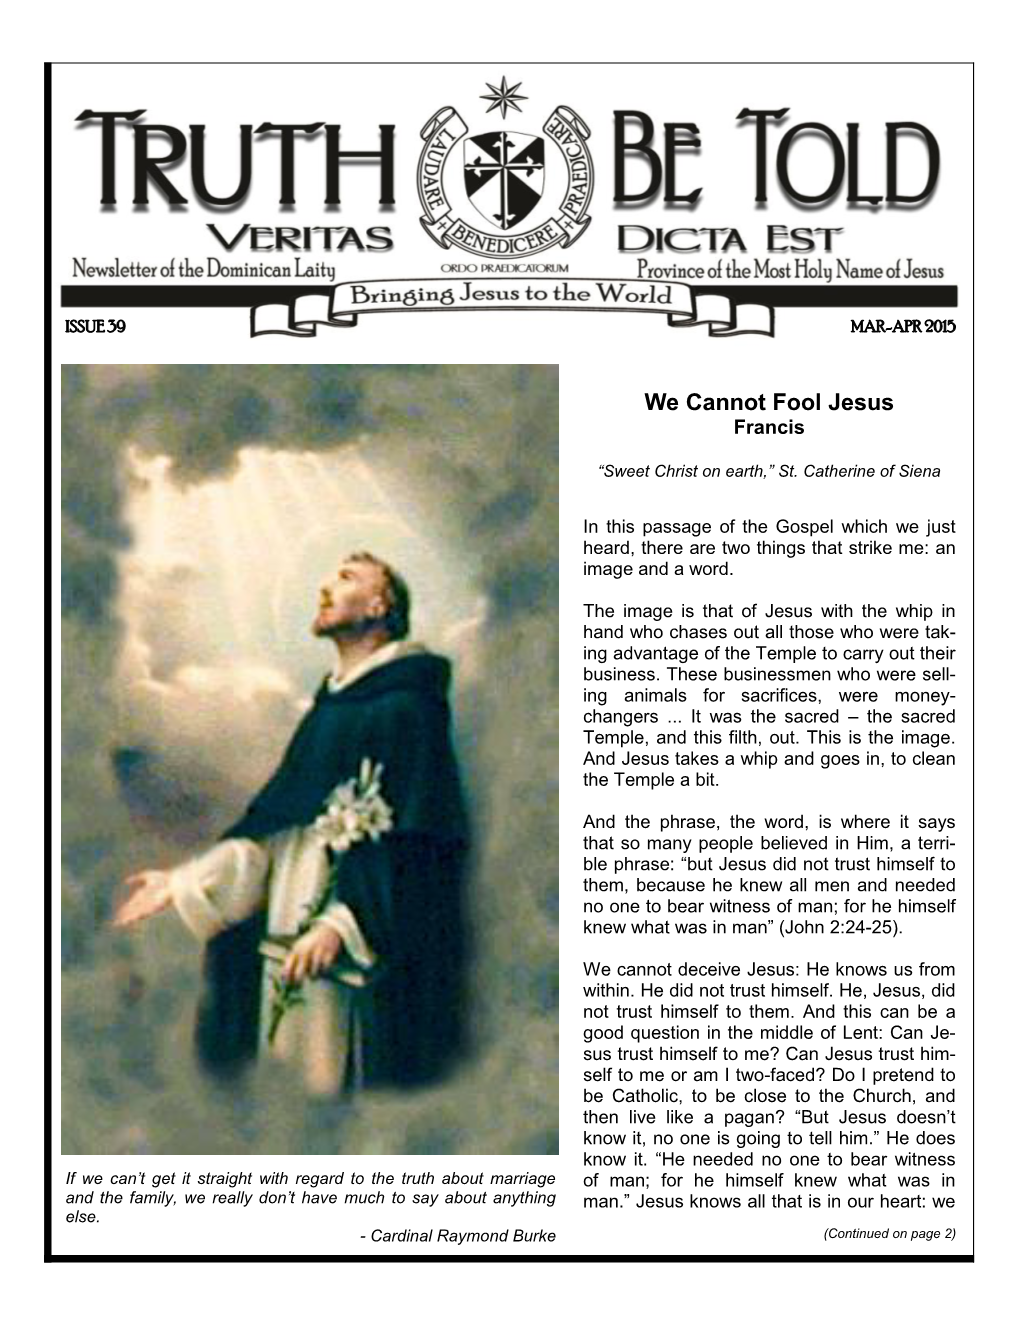 Truth Be Told 39 Page 2 Mar-Apr 2015